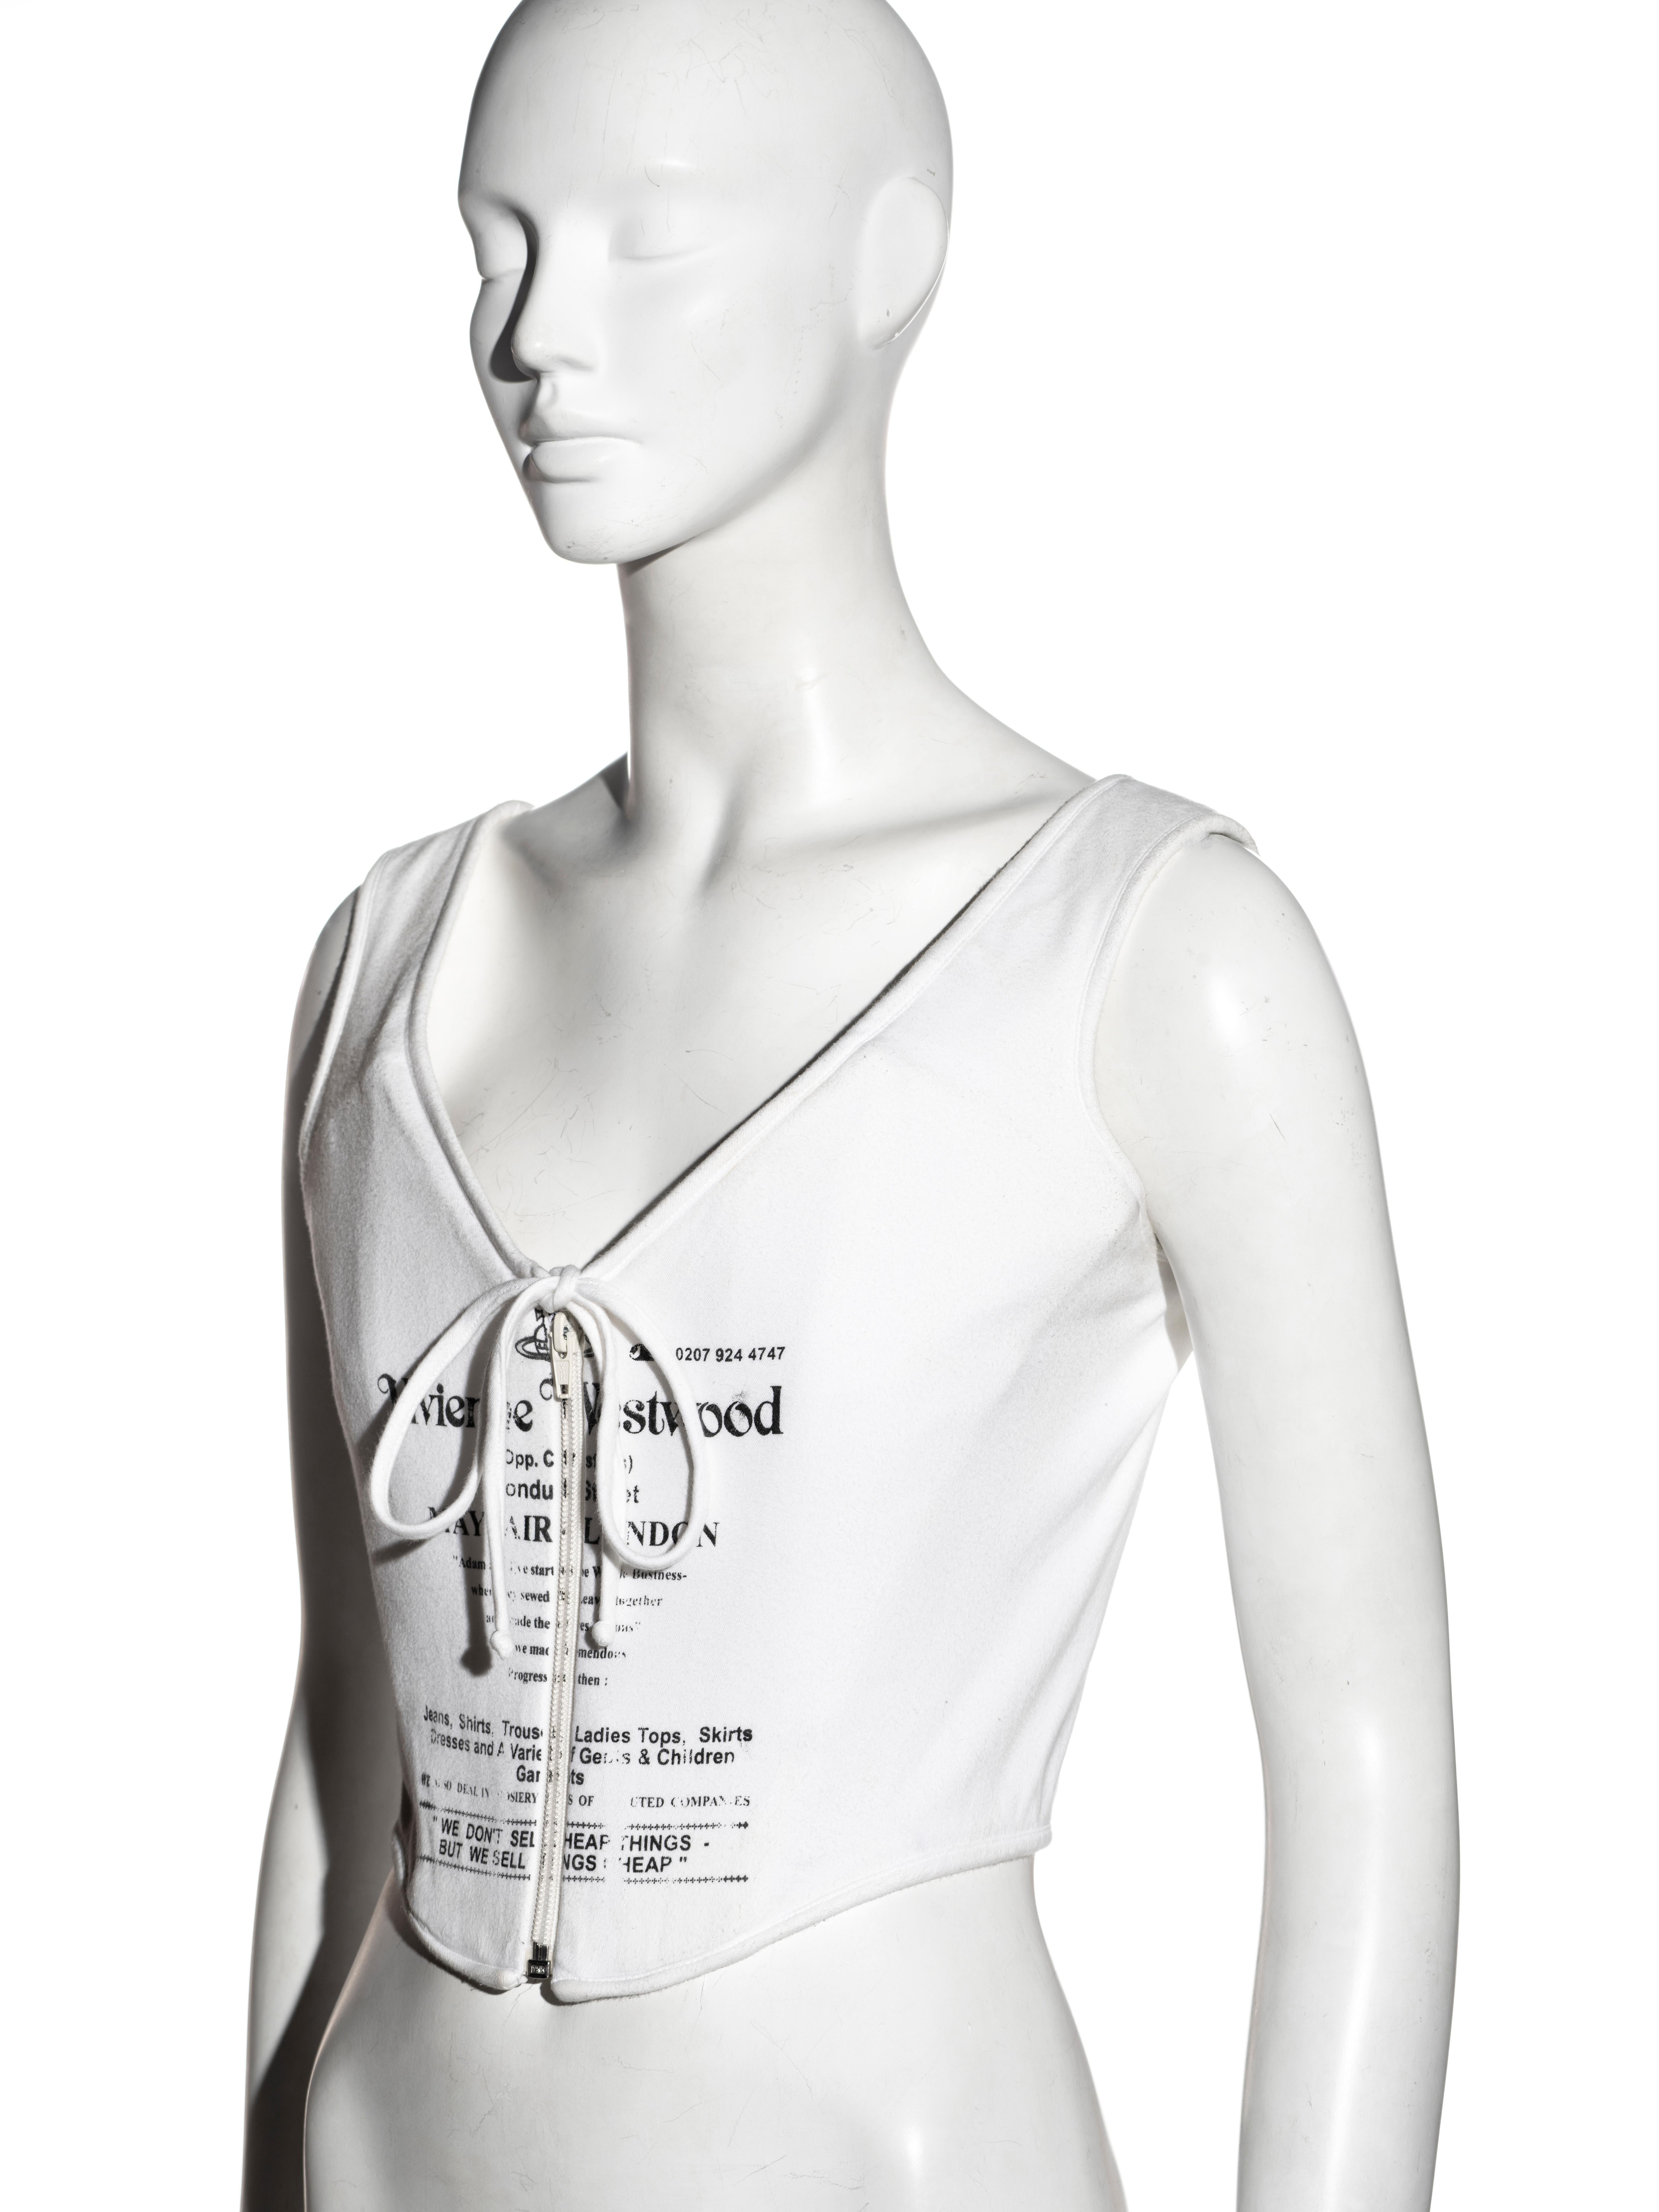 Gray Vivienne Westwood white jersey Conduit Street corset, ss 2002 For Sale